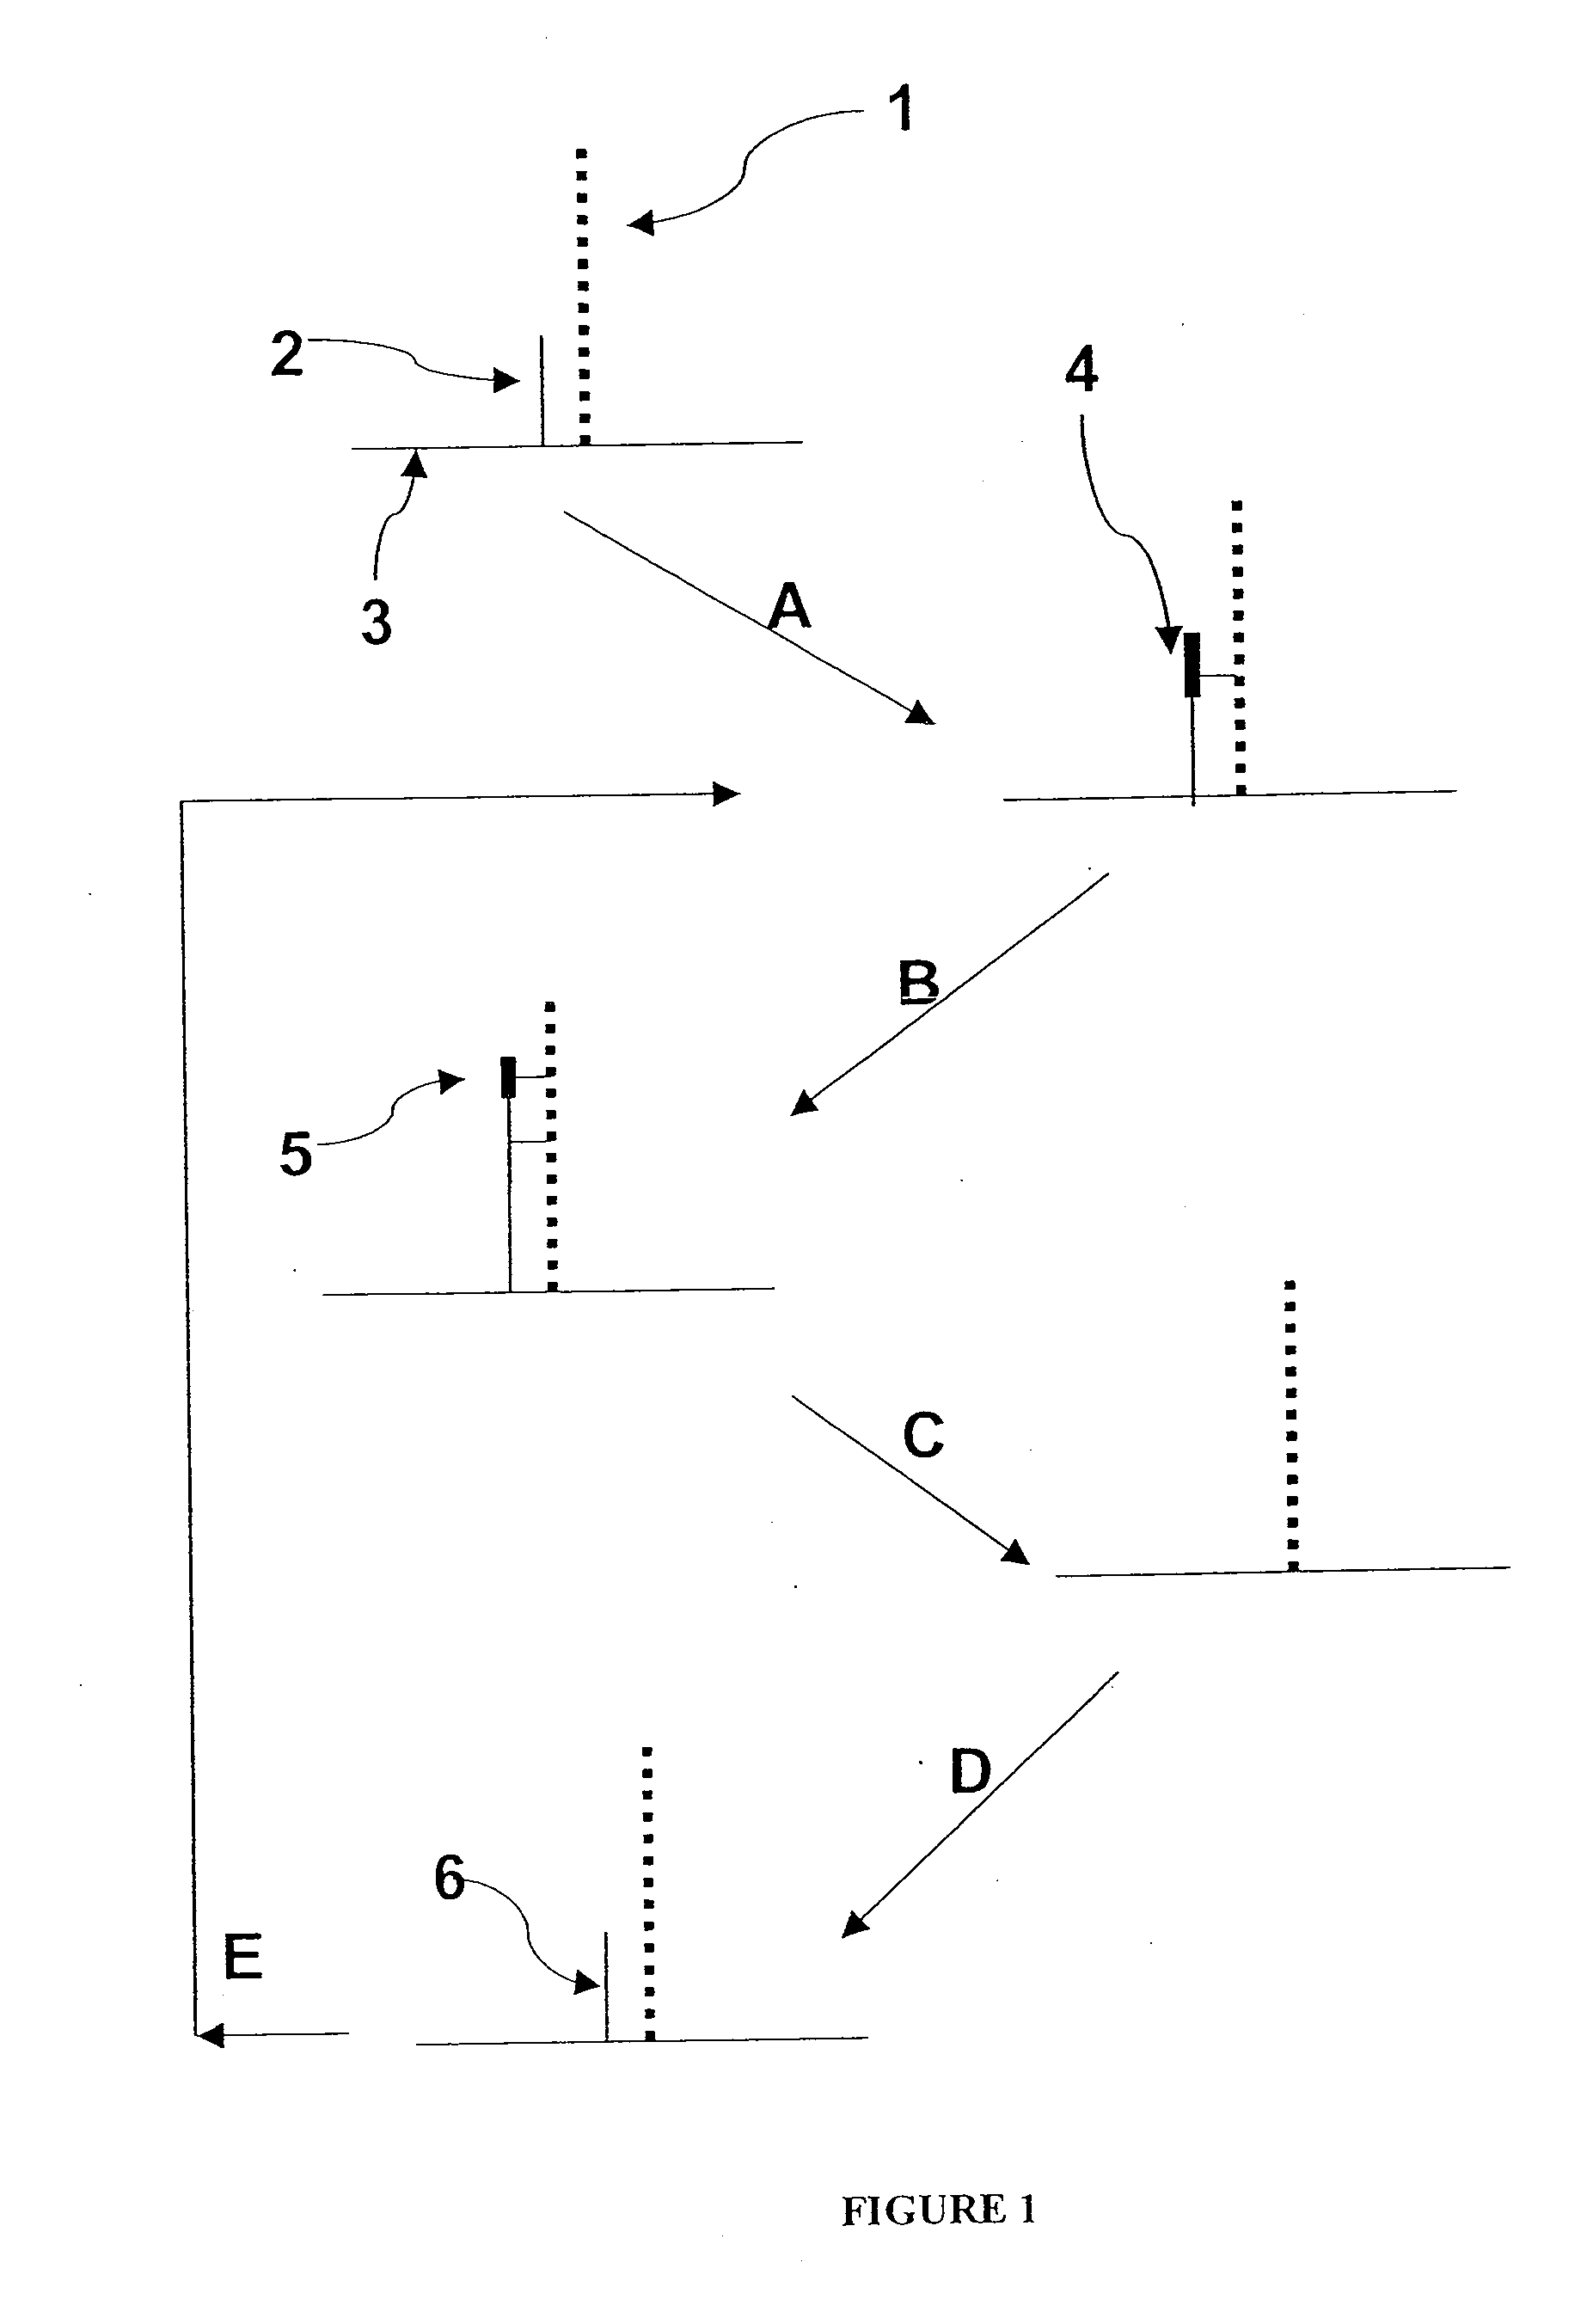 Methods for increasing accuracy of nucleic scid sequencing